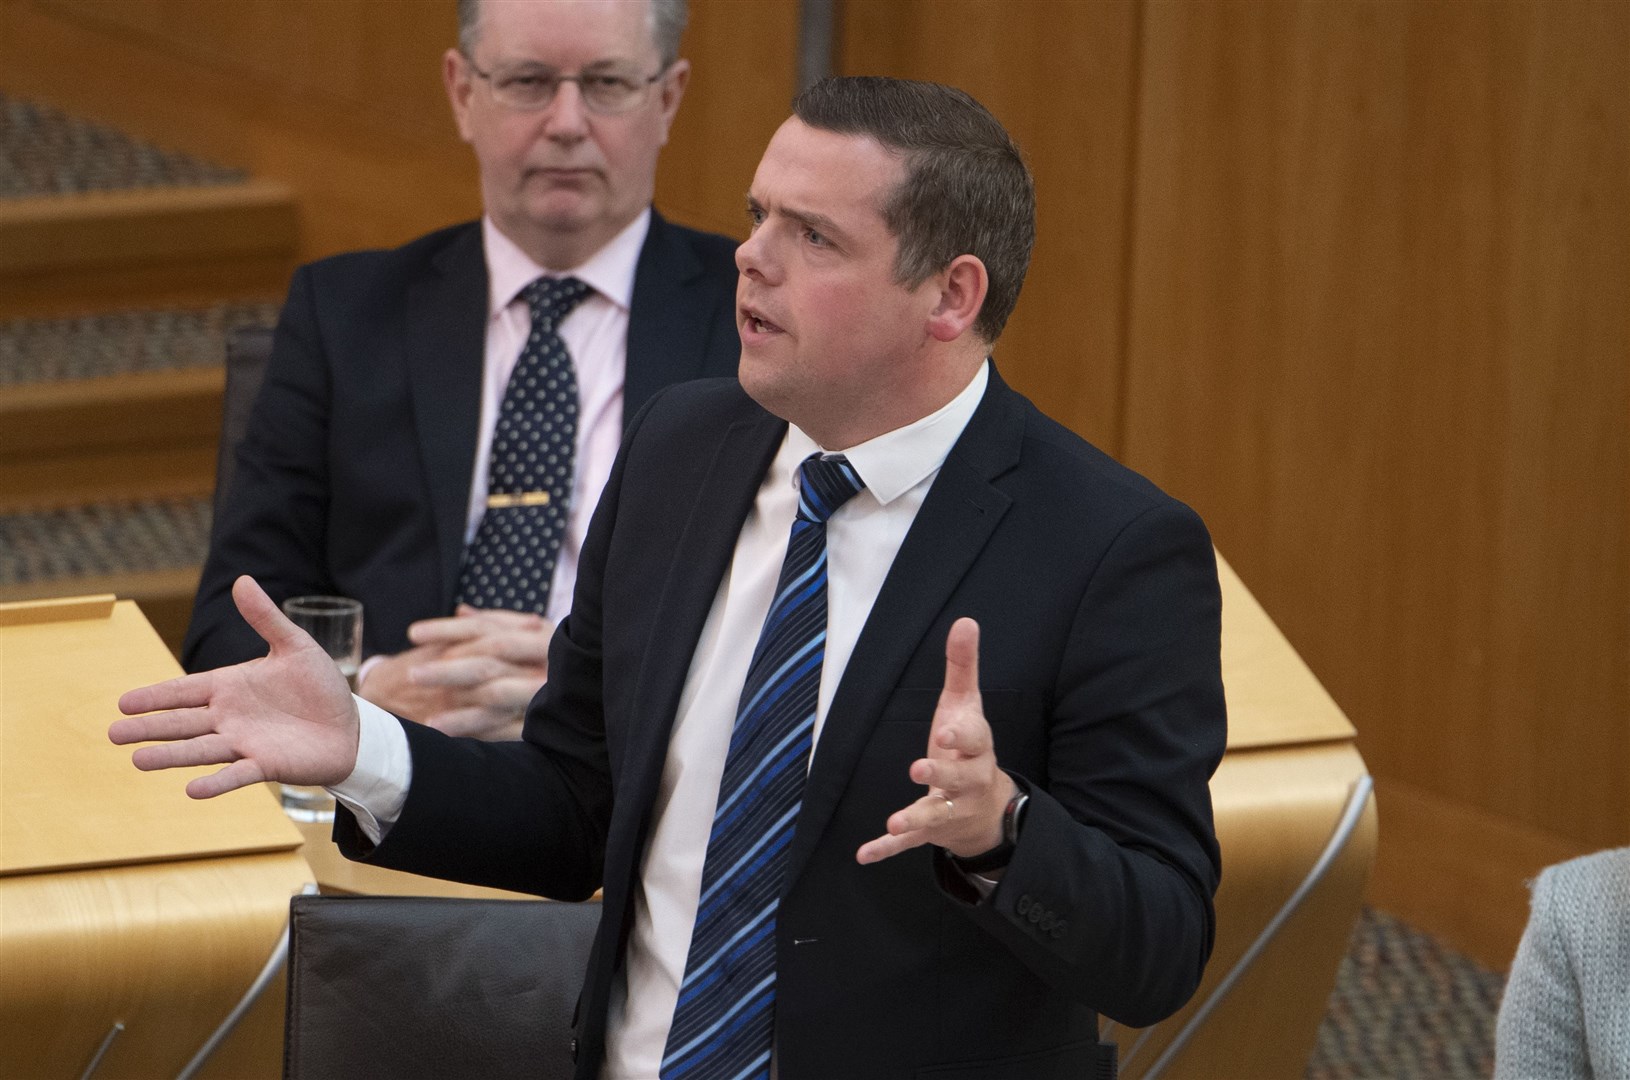 Scottish Tory leader Douglas Ross urged the First Minister to publish the findings in full (Lesley Martin/PA)